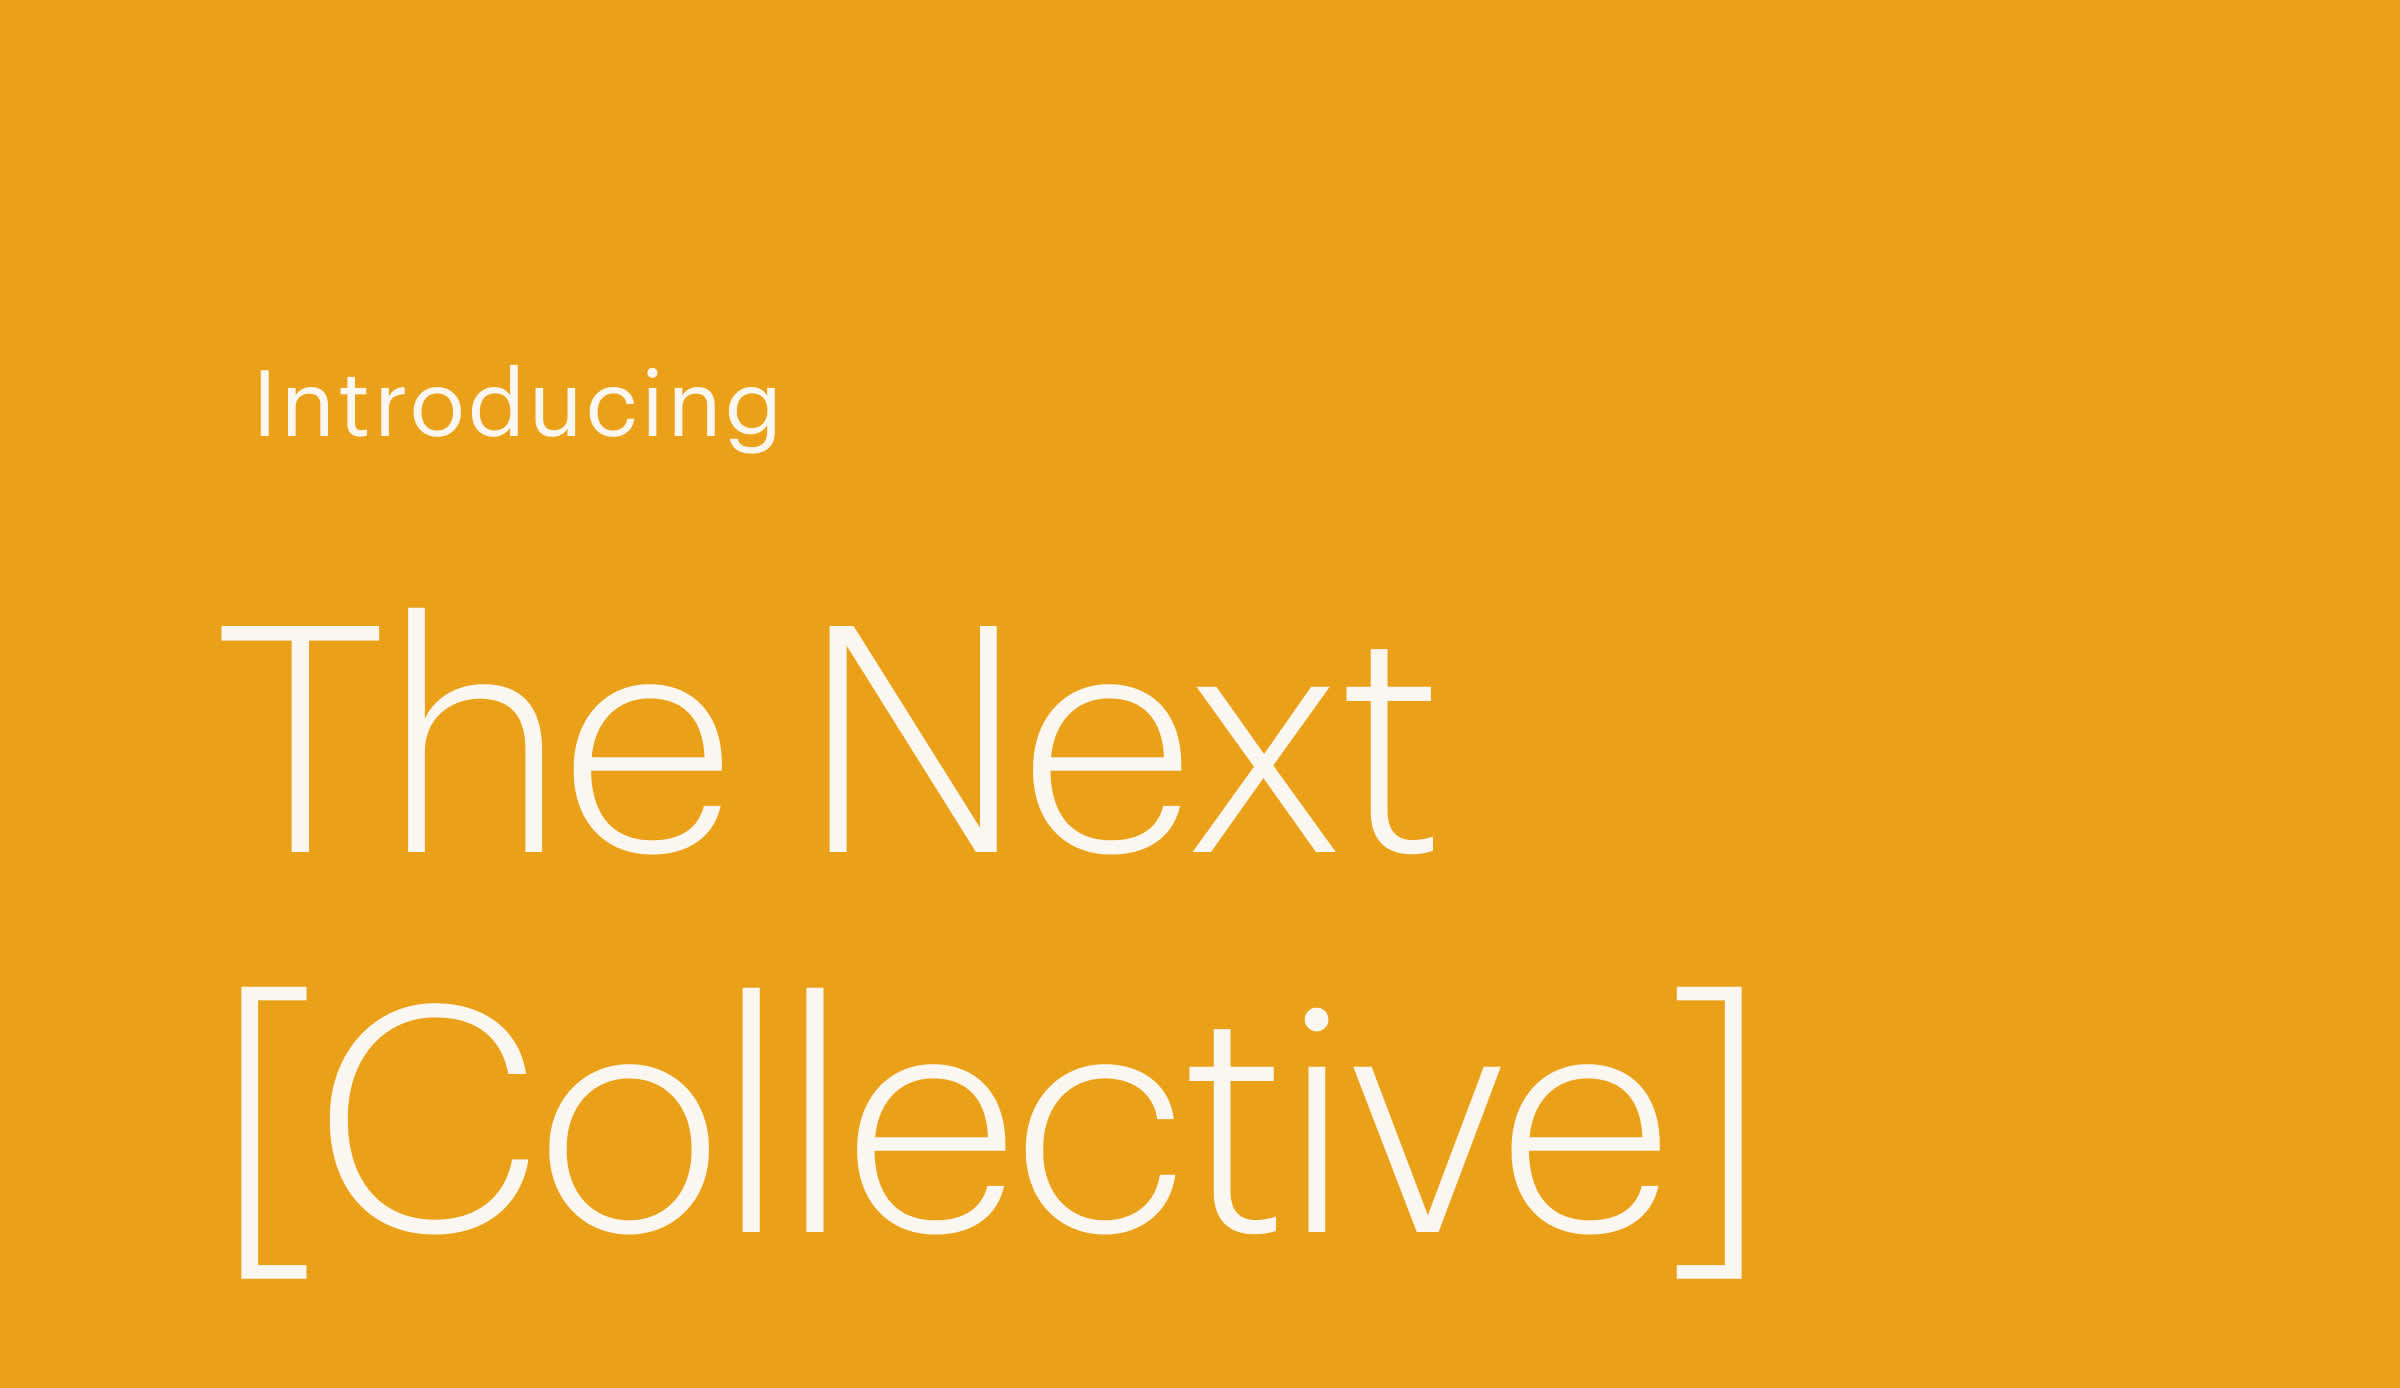 Introducing The New [Collective]